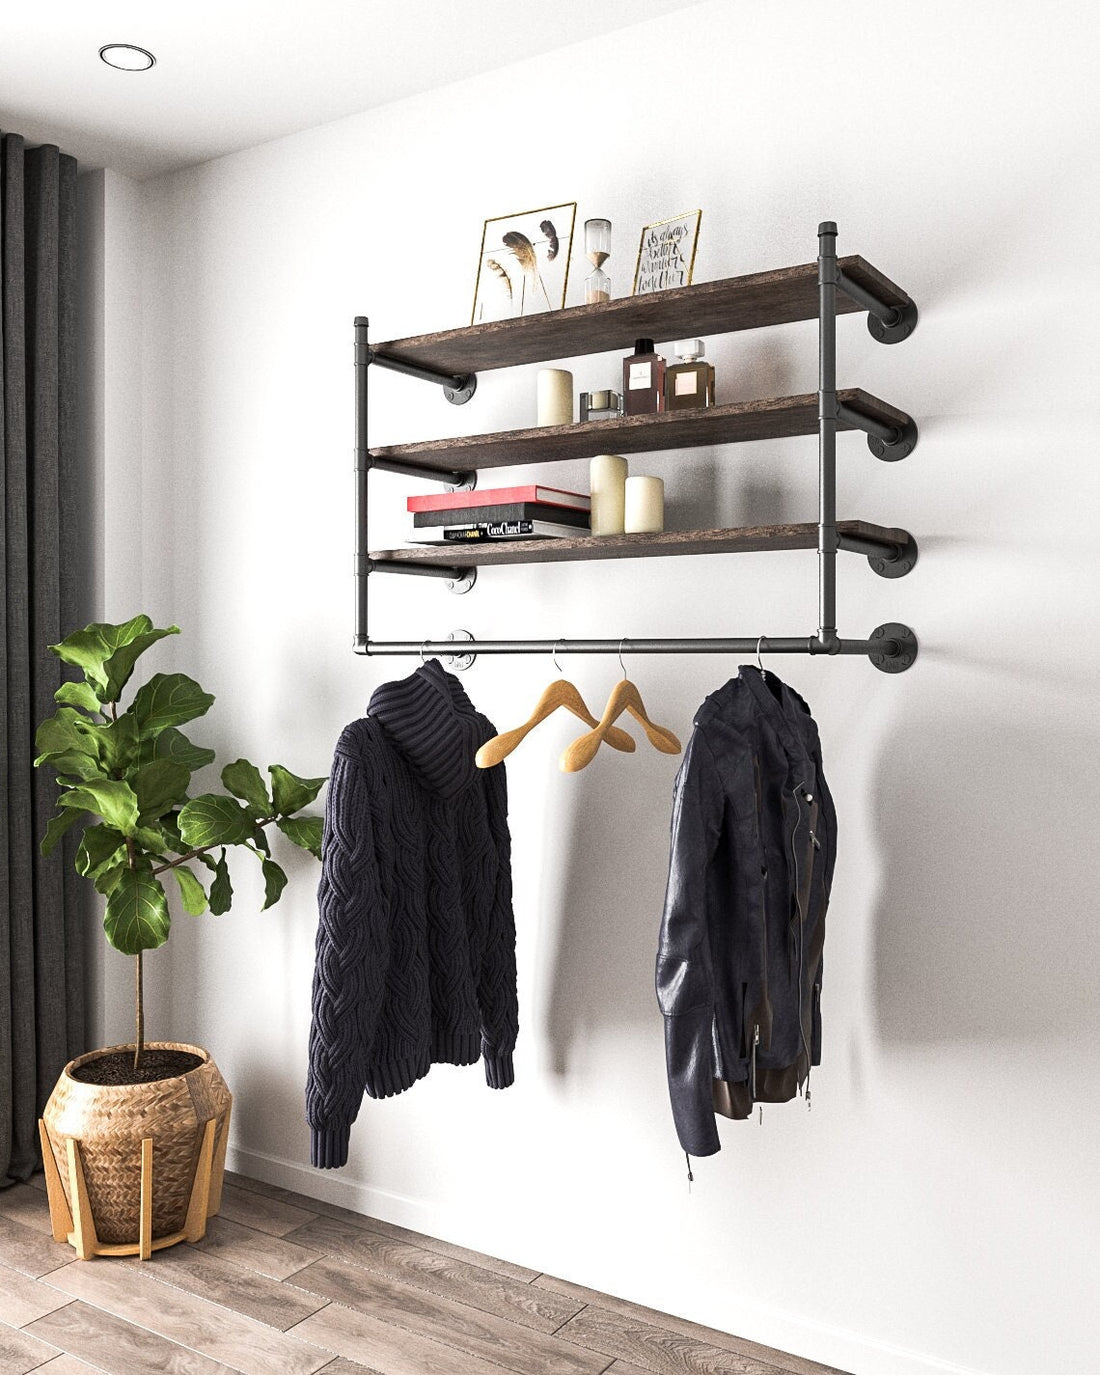 Emdo Versatile Wall Mounted Clothes Rail with Shelves